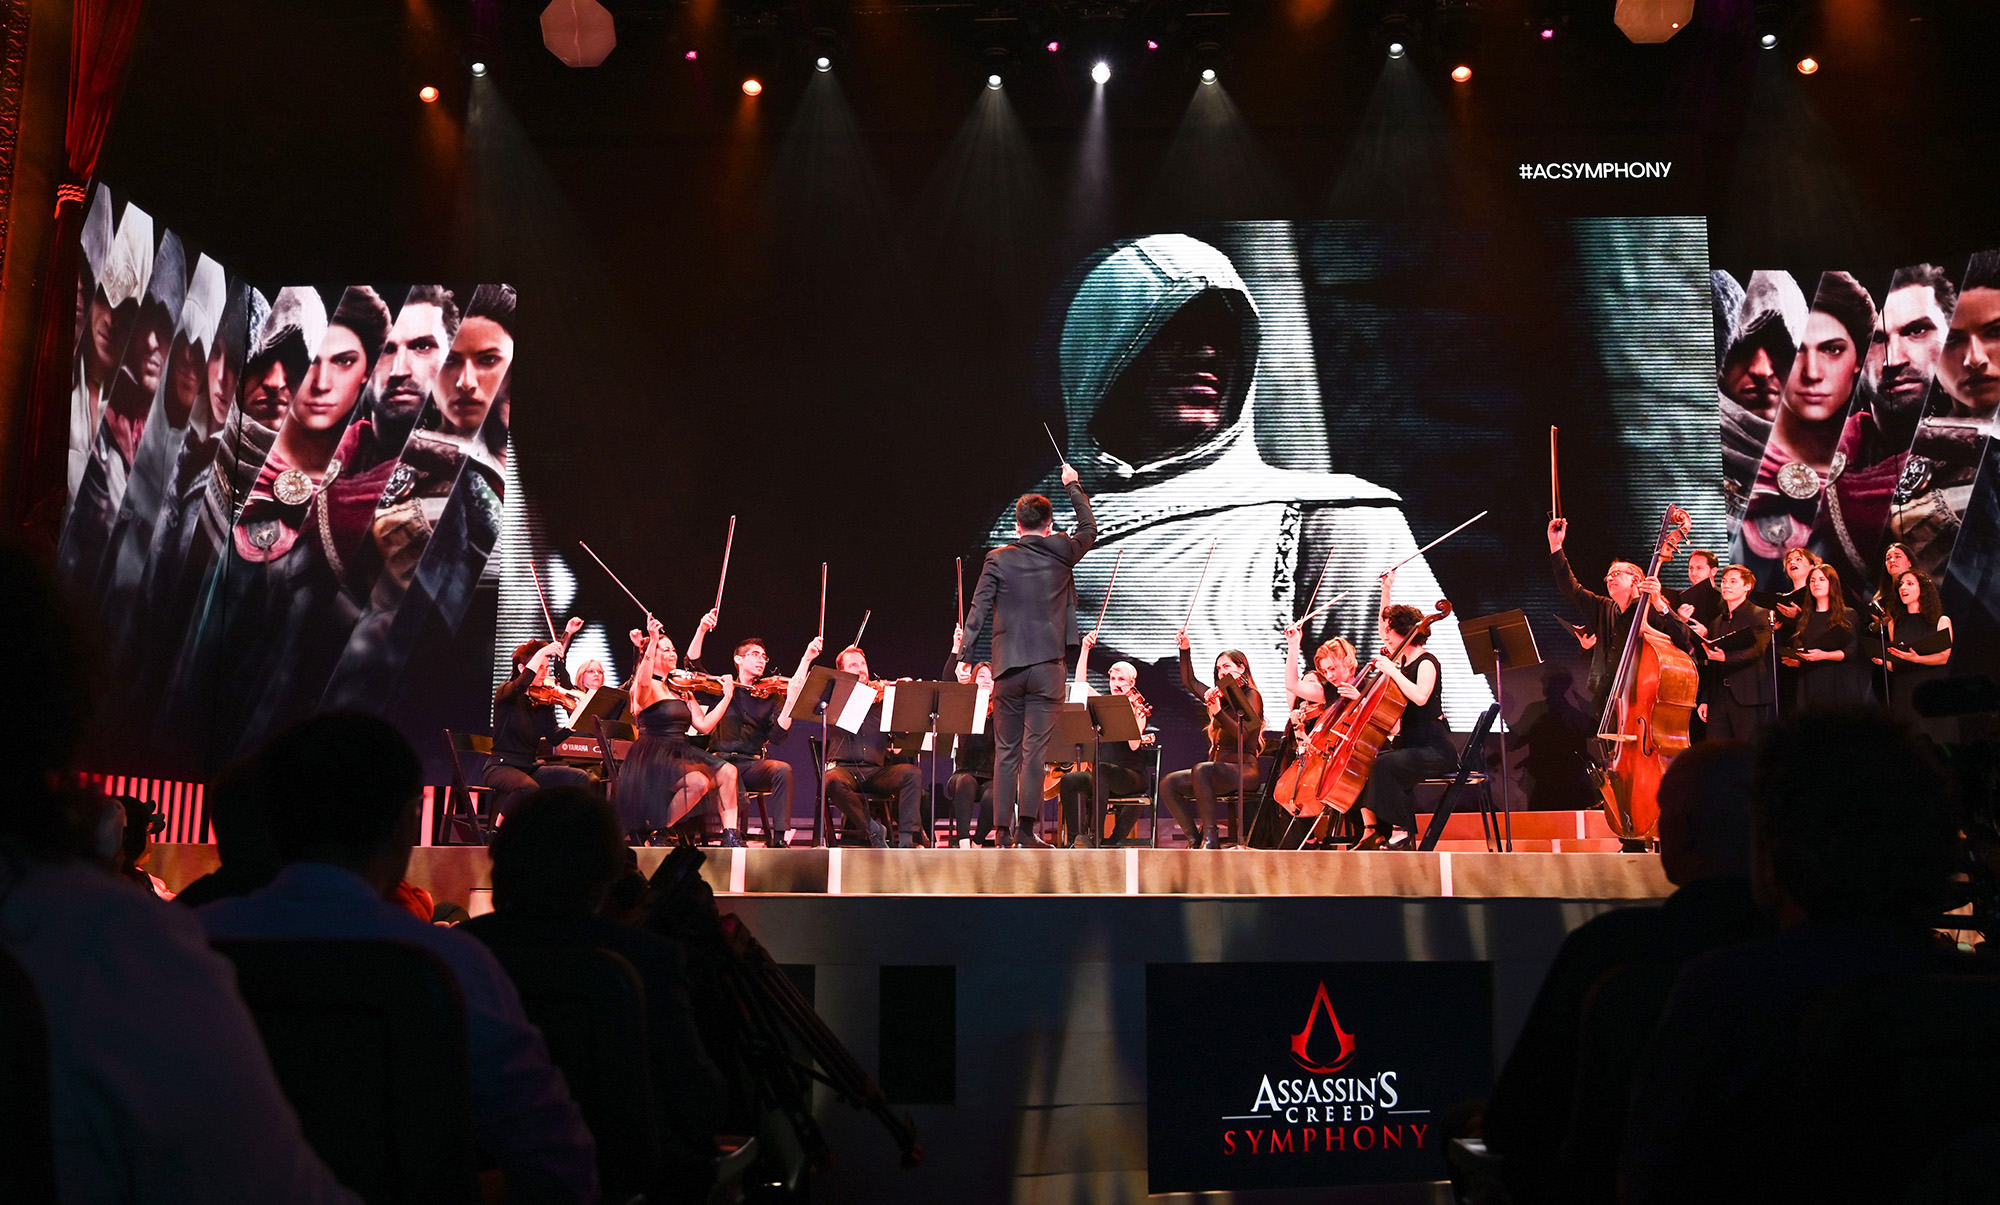 The Assassin's Creed Symphony performs on stage&nbsp;at the Ubisoft E3 press conference in Los Angeles in 2019.&nbsp;